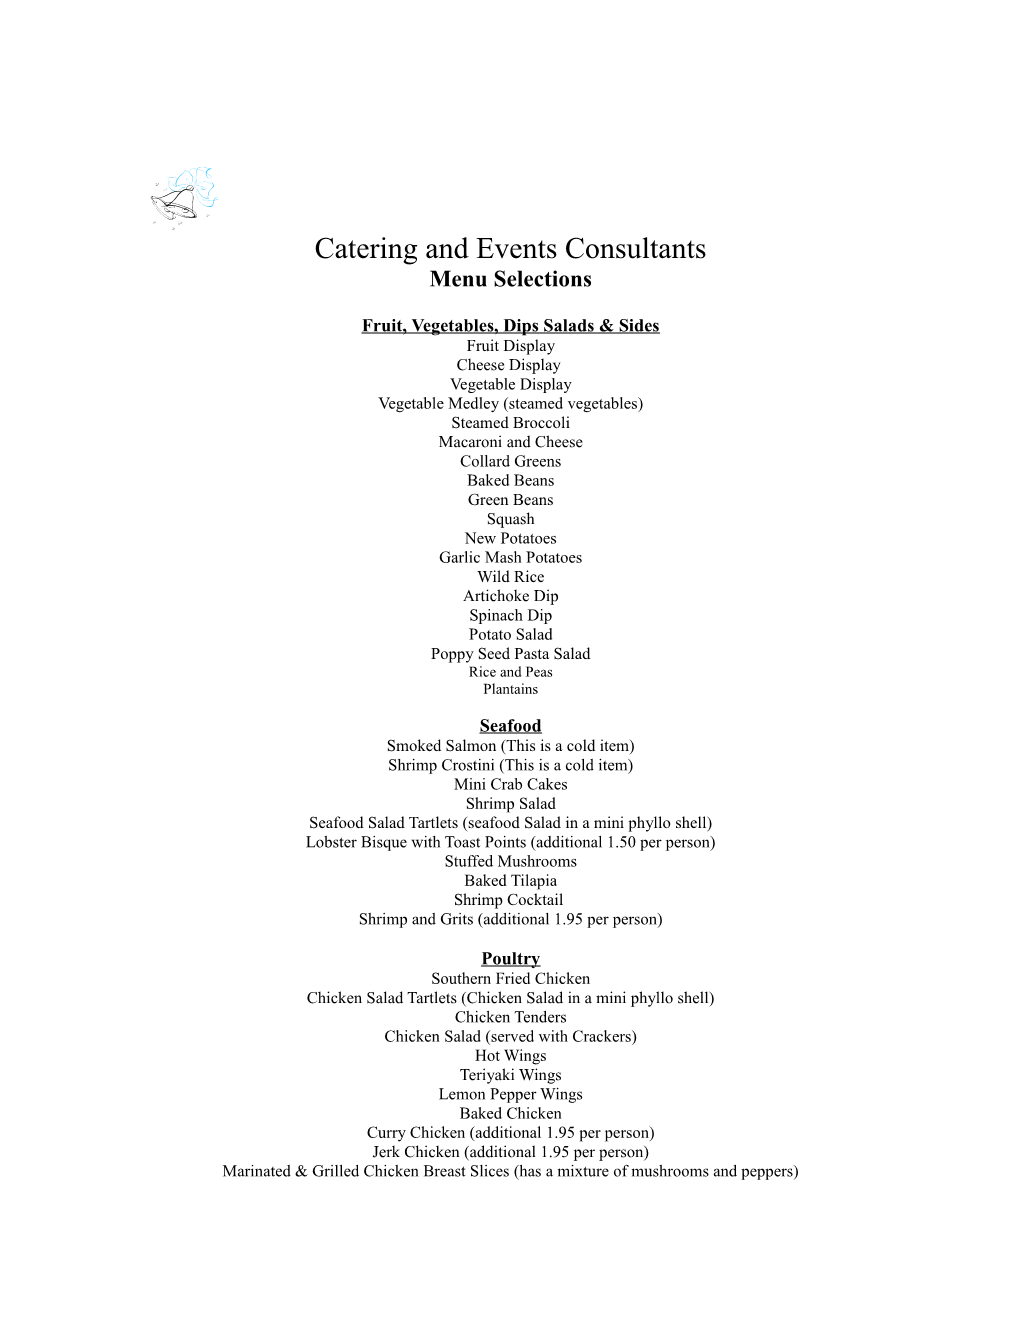 Catering and Events Consultants